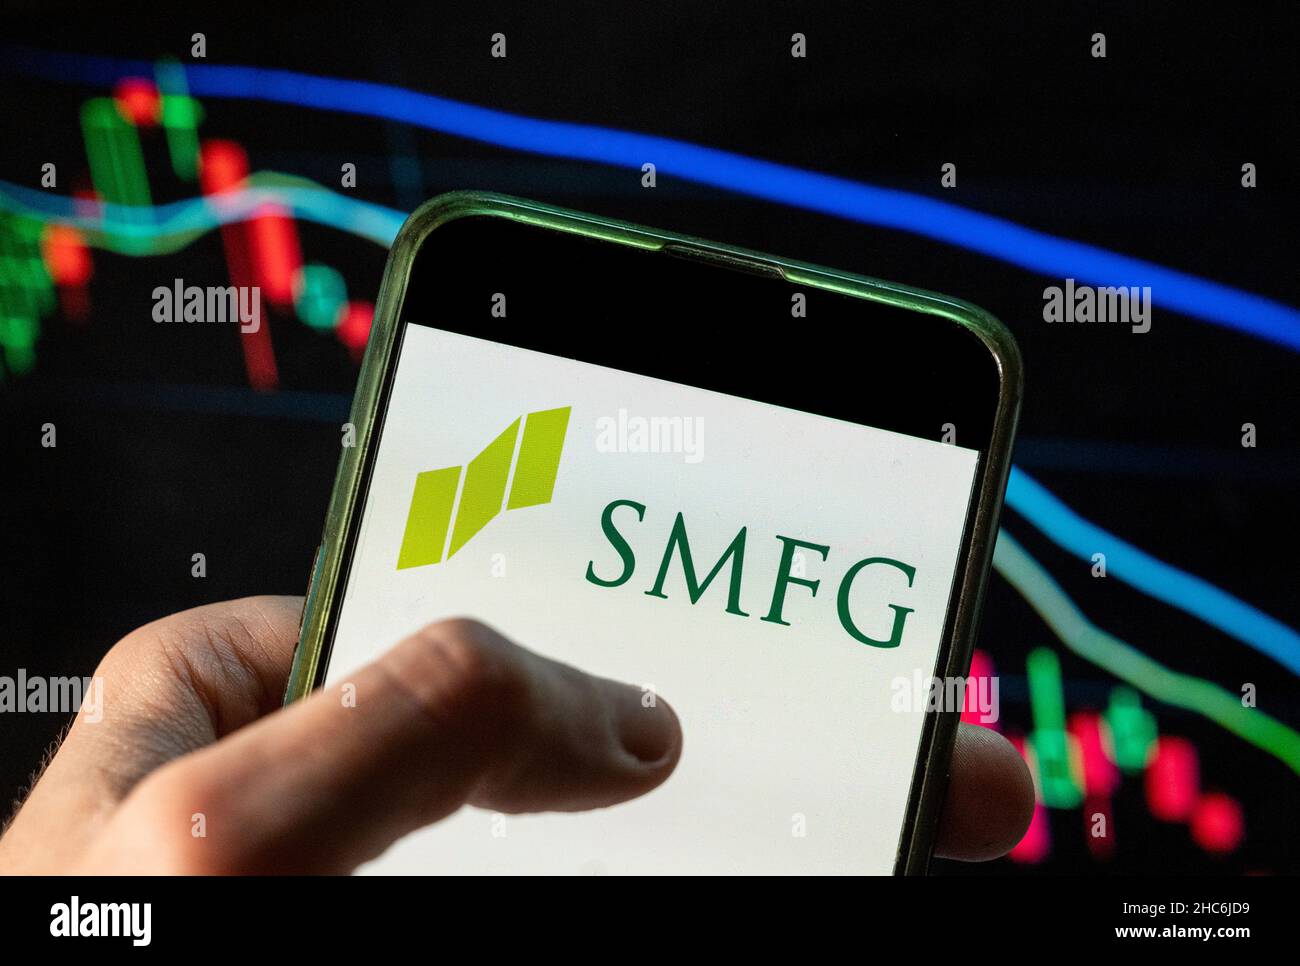 In this photo illustration the Japanese multinational banking and financial company Sumitomo Mitsui Financial Group SMFG logo seen displayed on a smartphone with an economic stock exchange index graph in the background. Stock Photo